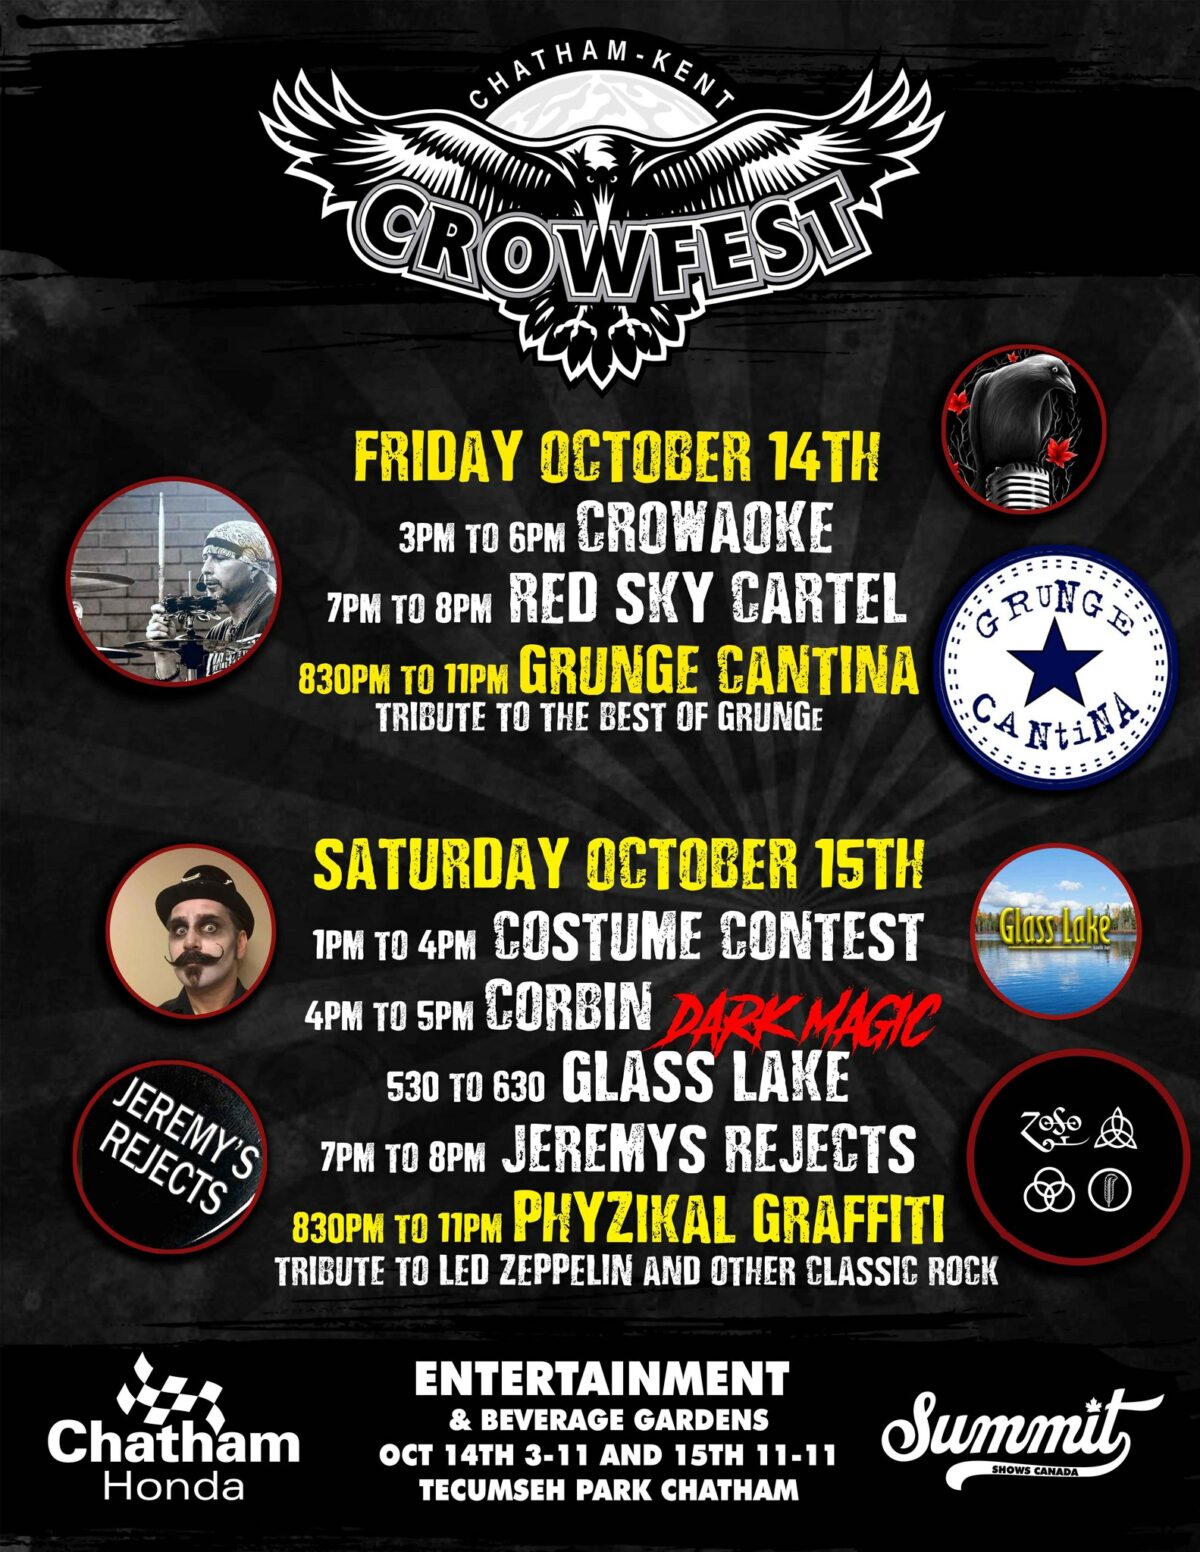 ChathamKent Crowfest CK Today Travel Guide & Calendar